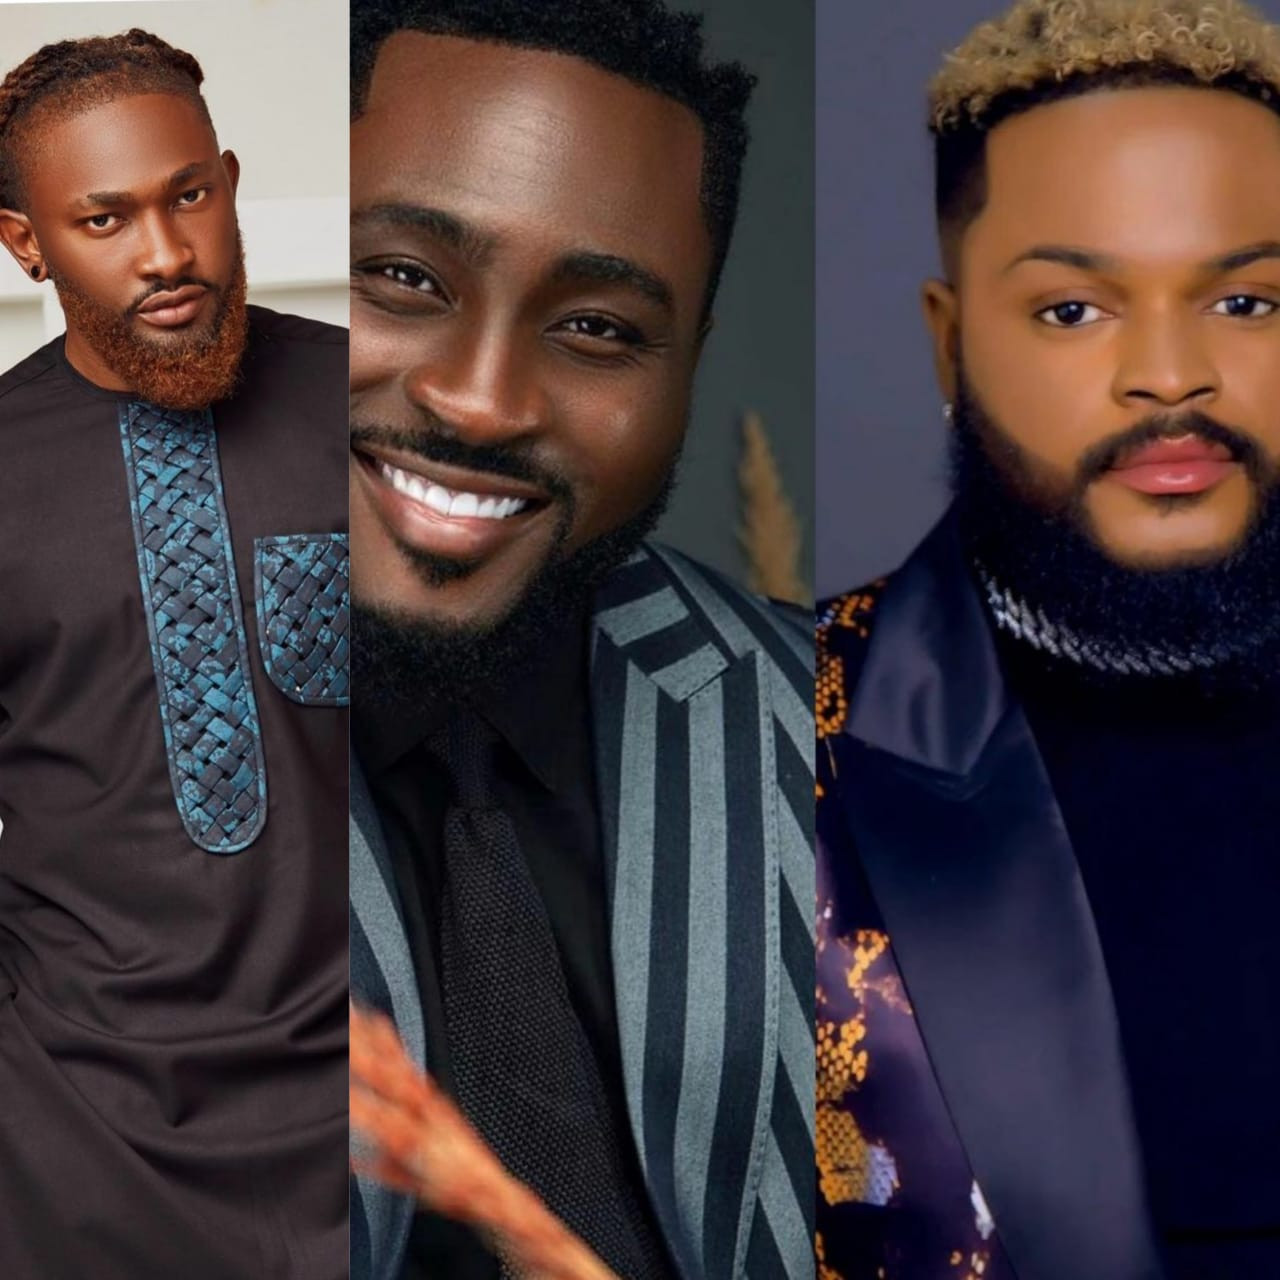 #BBNaija: Bullying is totally unacceptable - Uti Nwachukwu reacts to Pere and WhiteMoney's clash